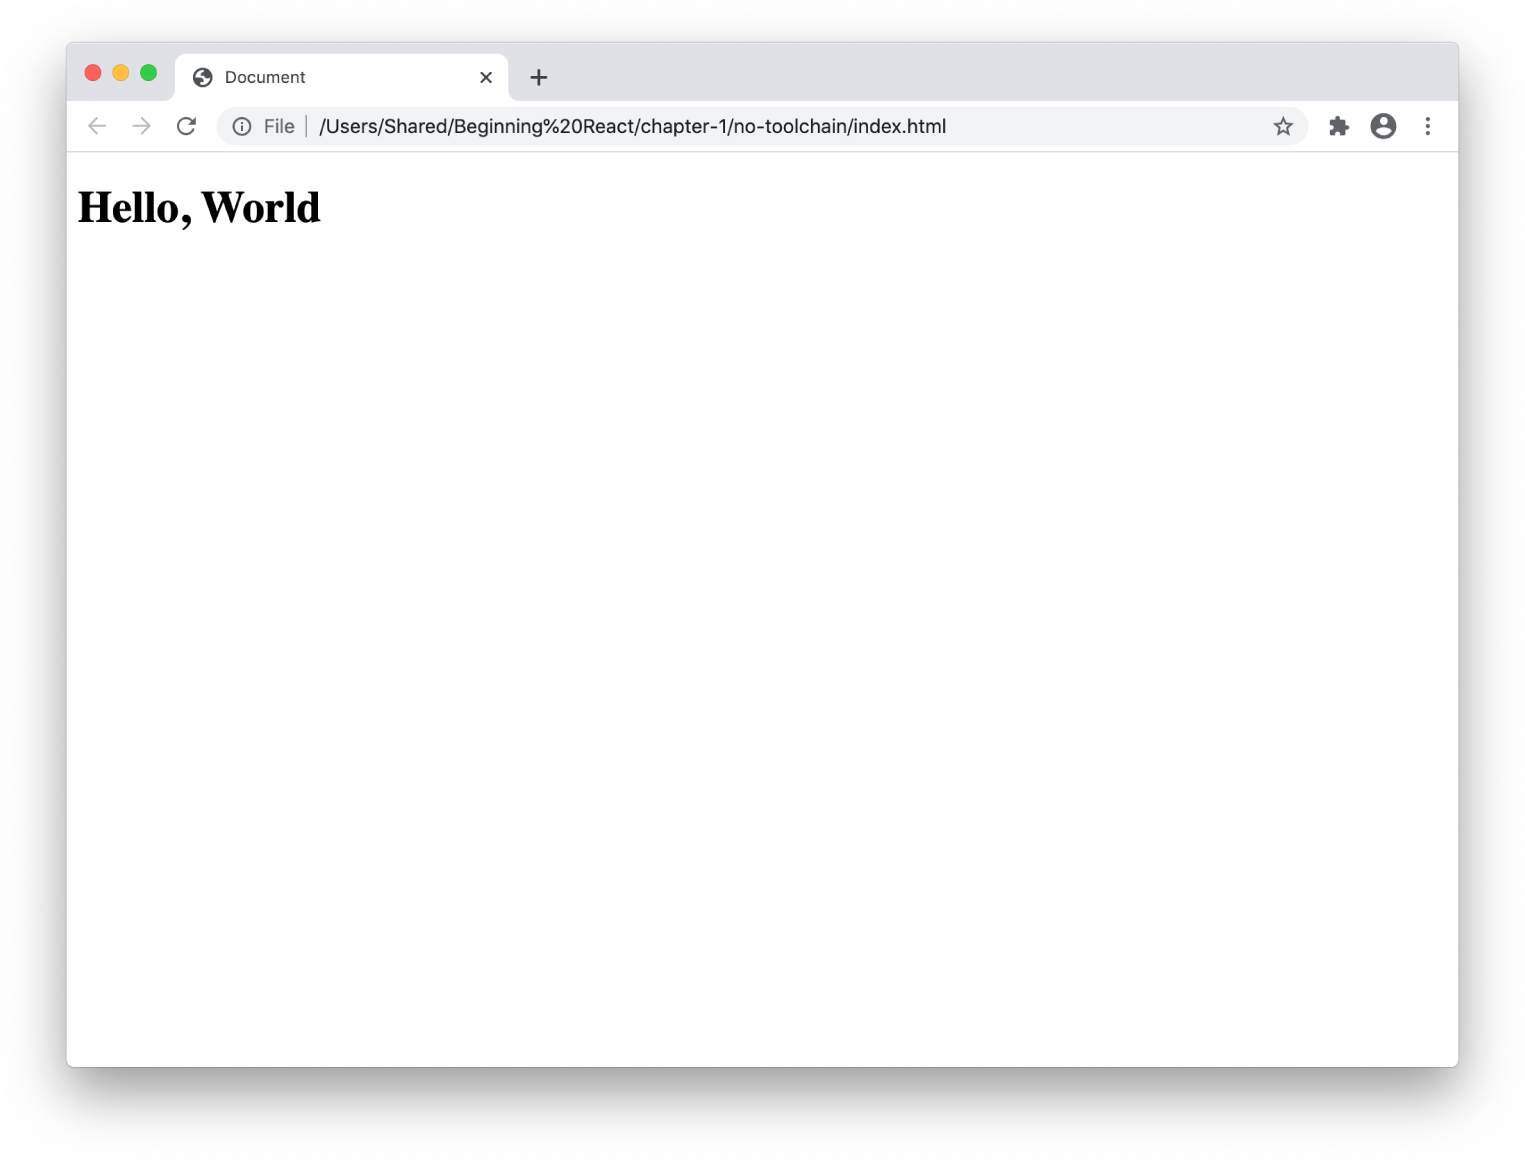 Snapshot shows Hello, World running in a browser